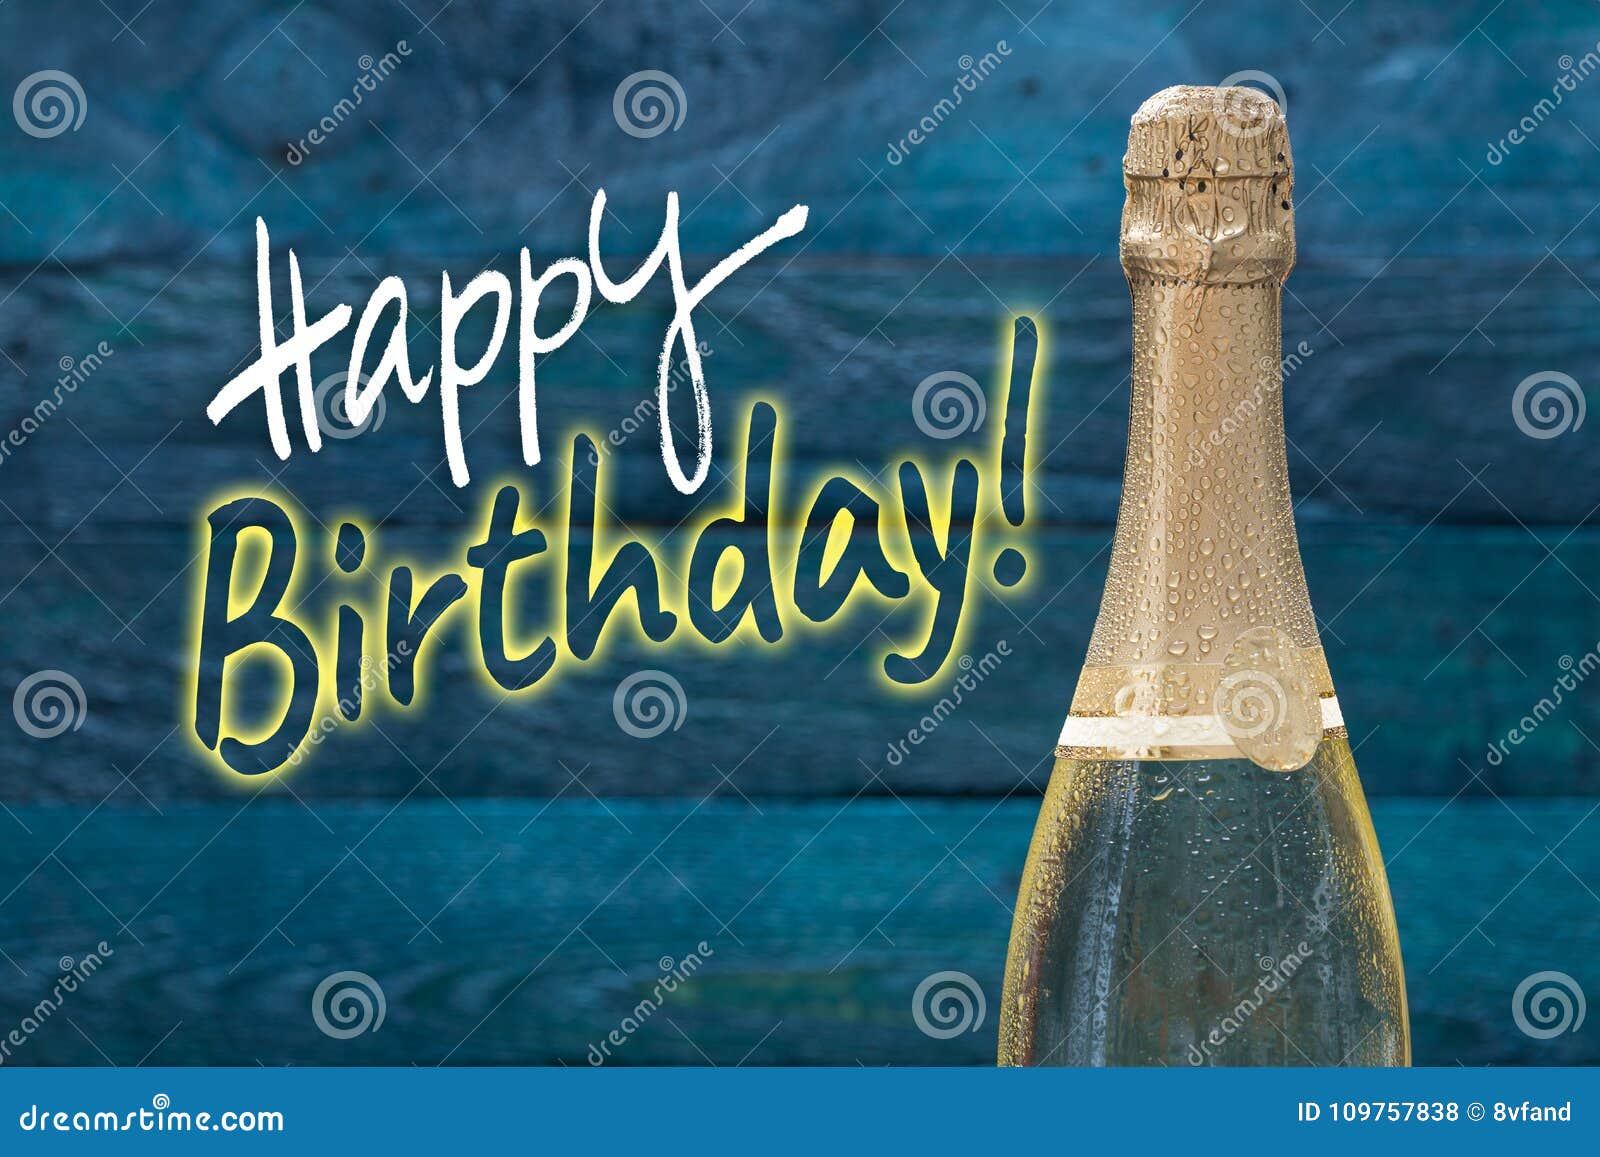 18 279 Happy Birthday Champagne Photos Free Royalty Free Stock Photos From Dreamstime